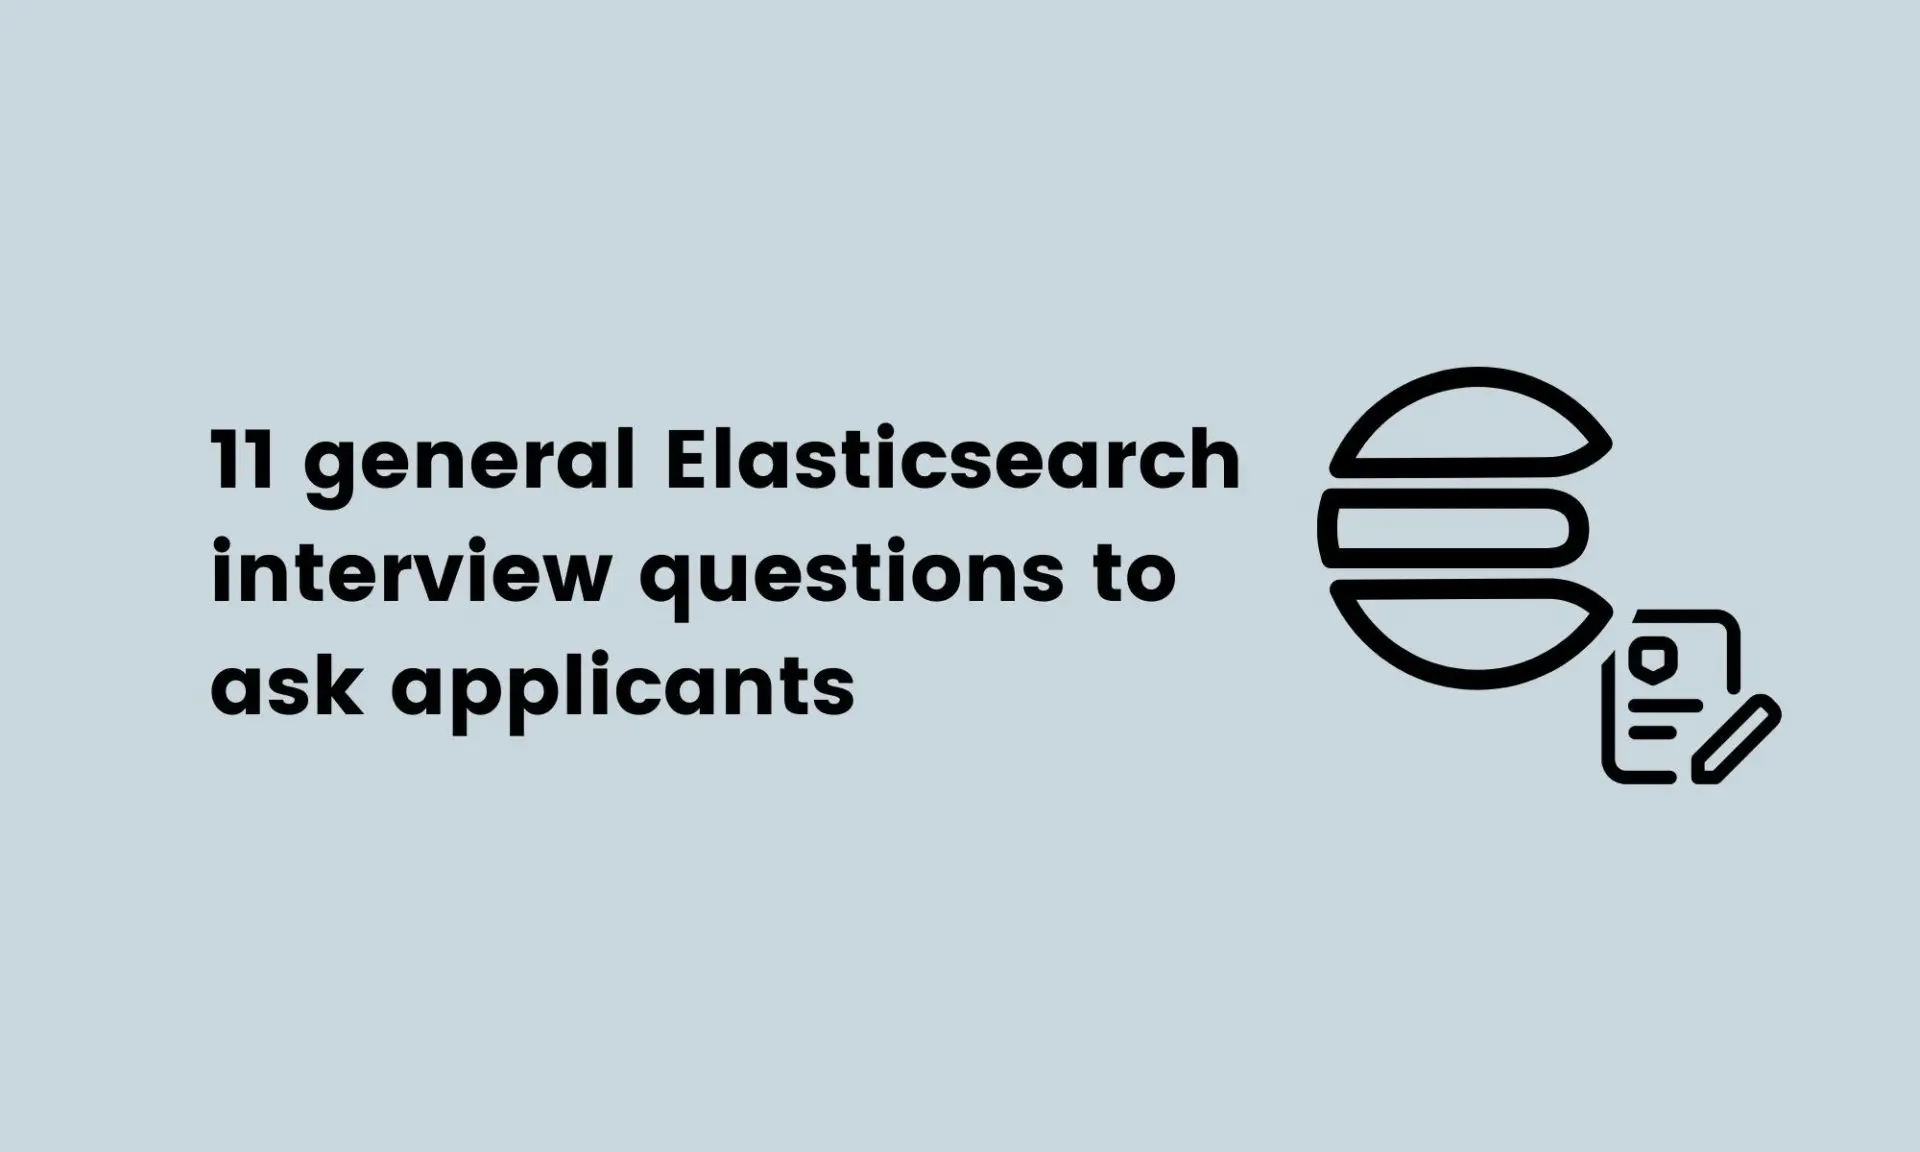 11 general Elasticsearch interview questions to ask applicants